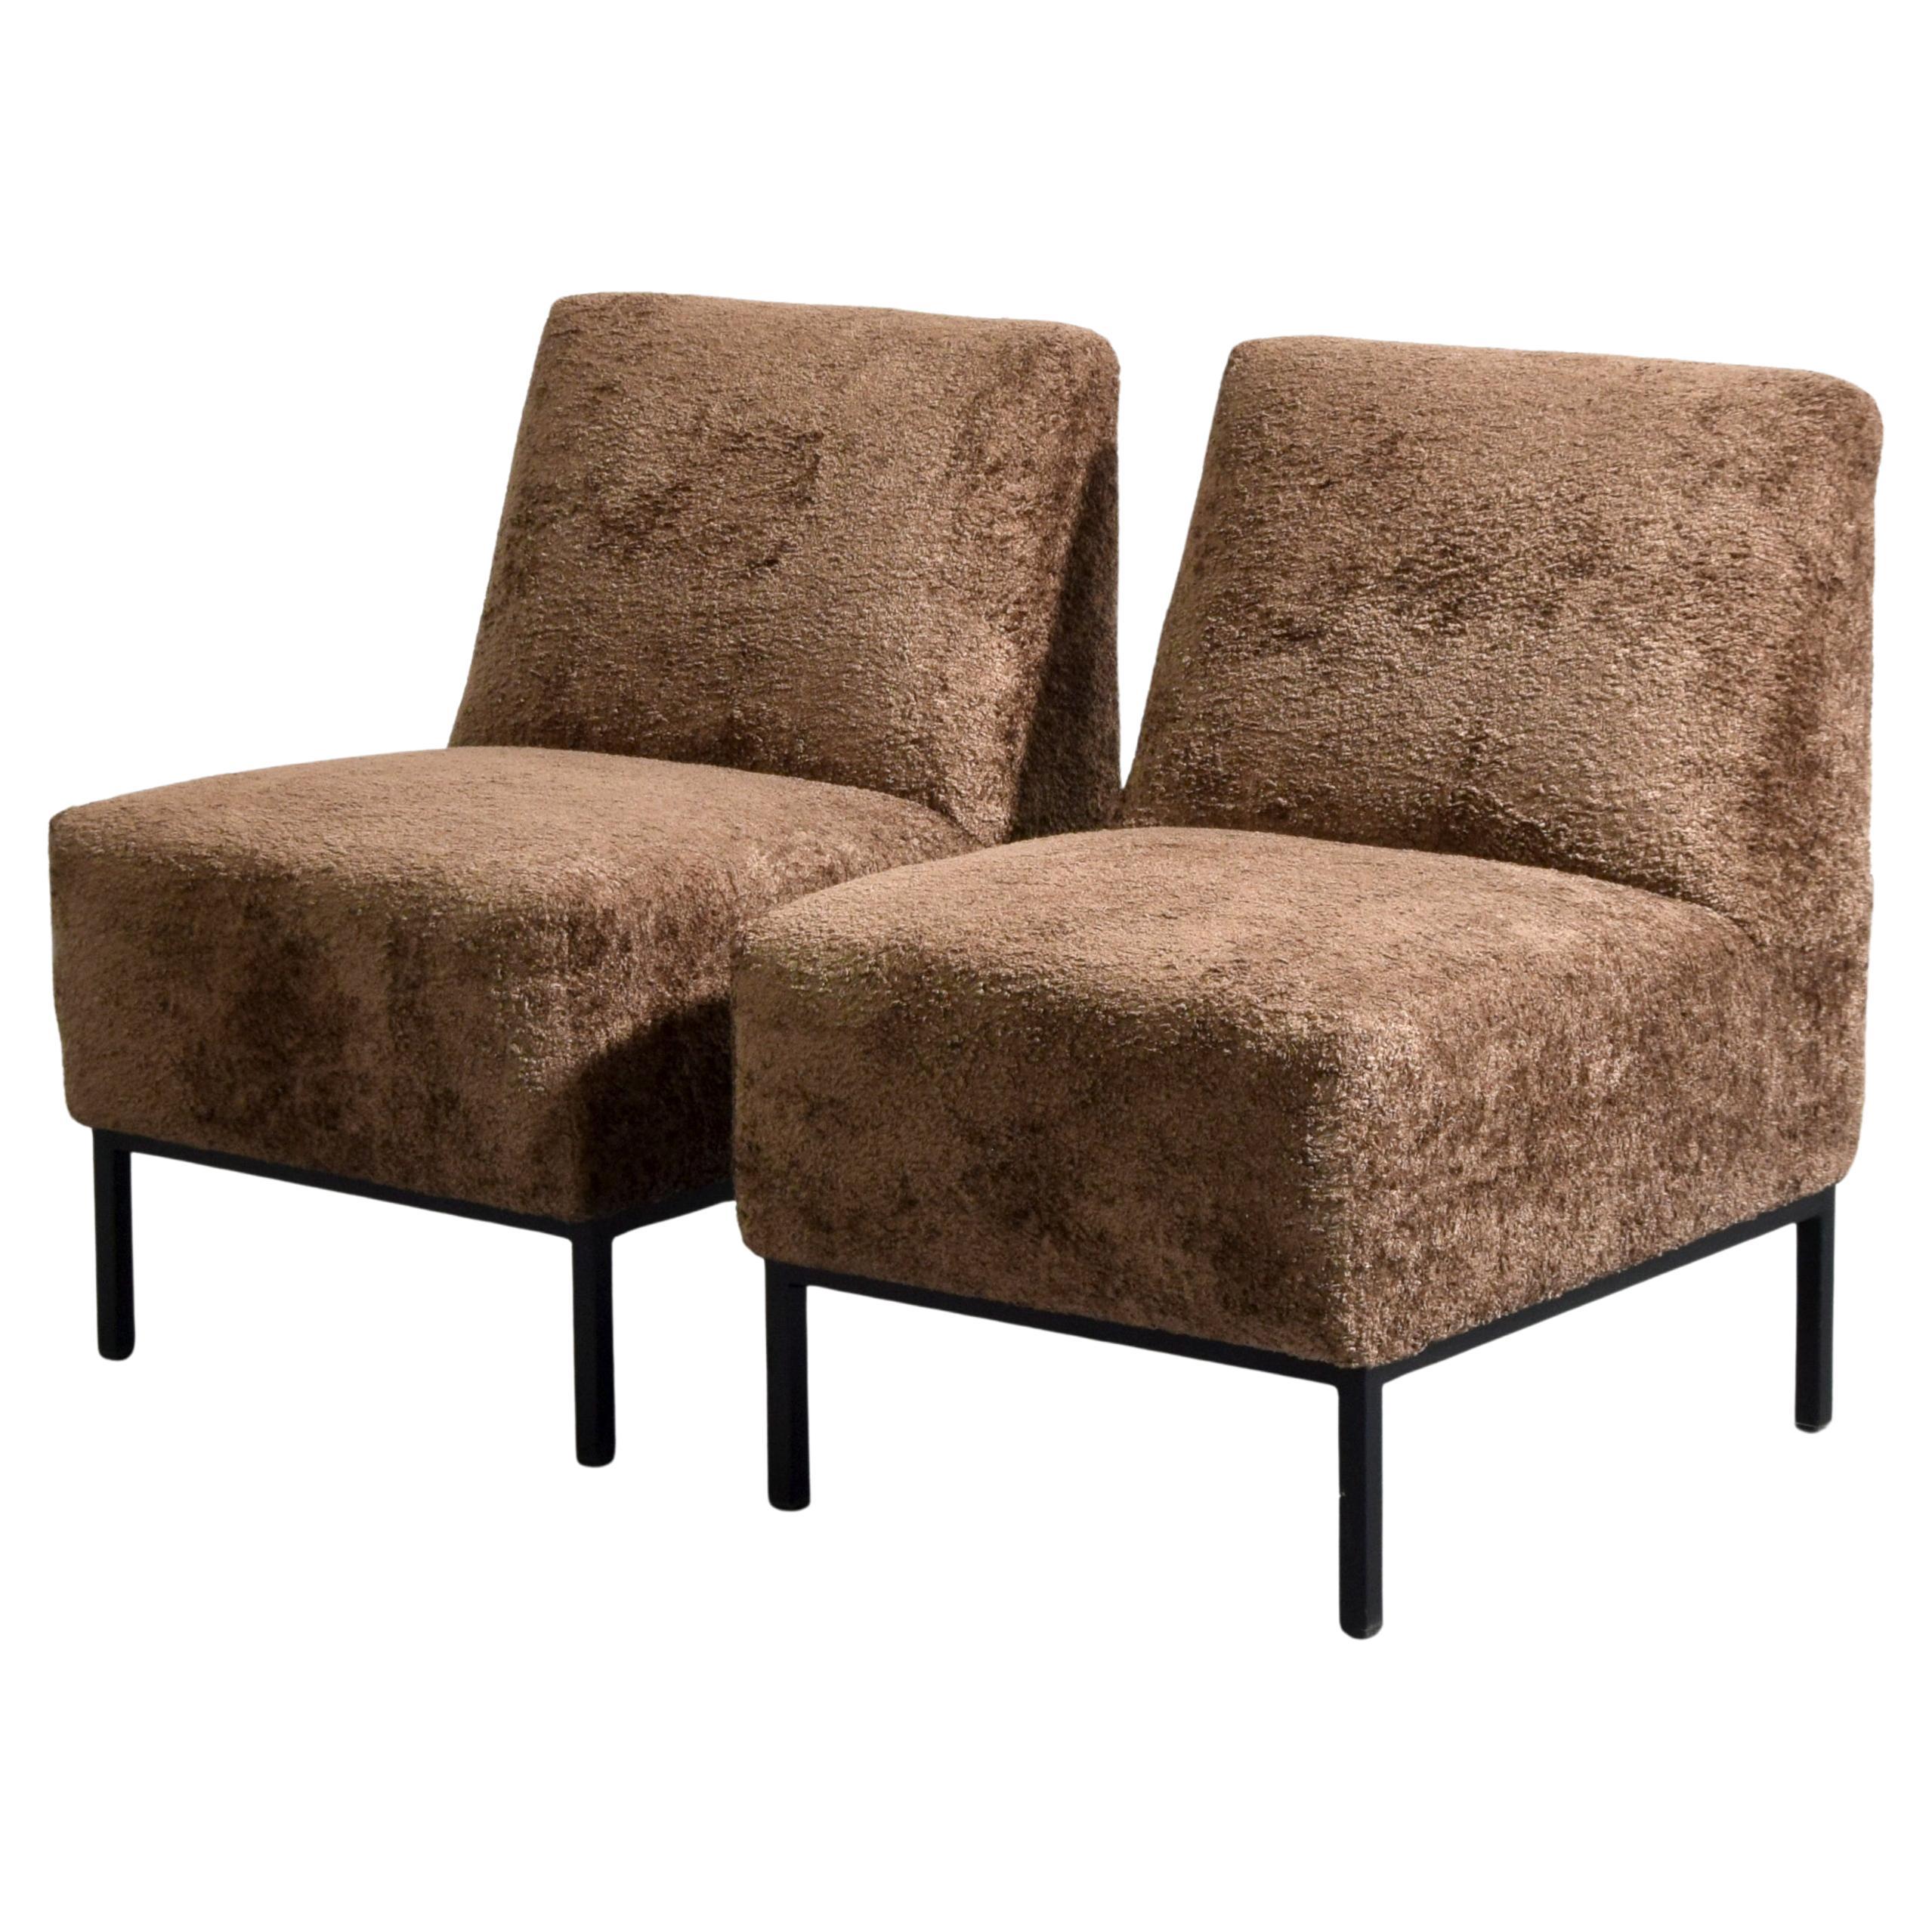 Pair of Alain Richard Lounge Chairs For Sale